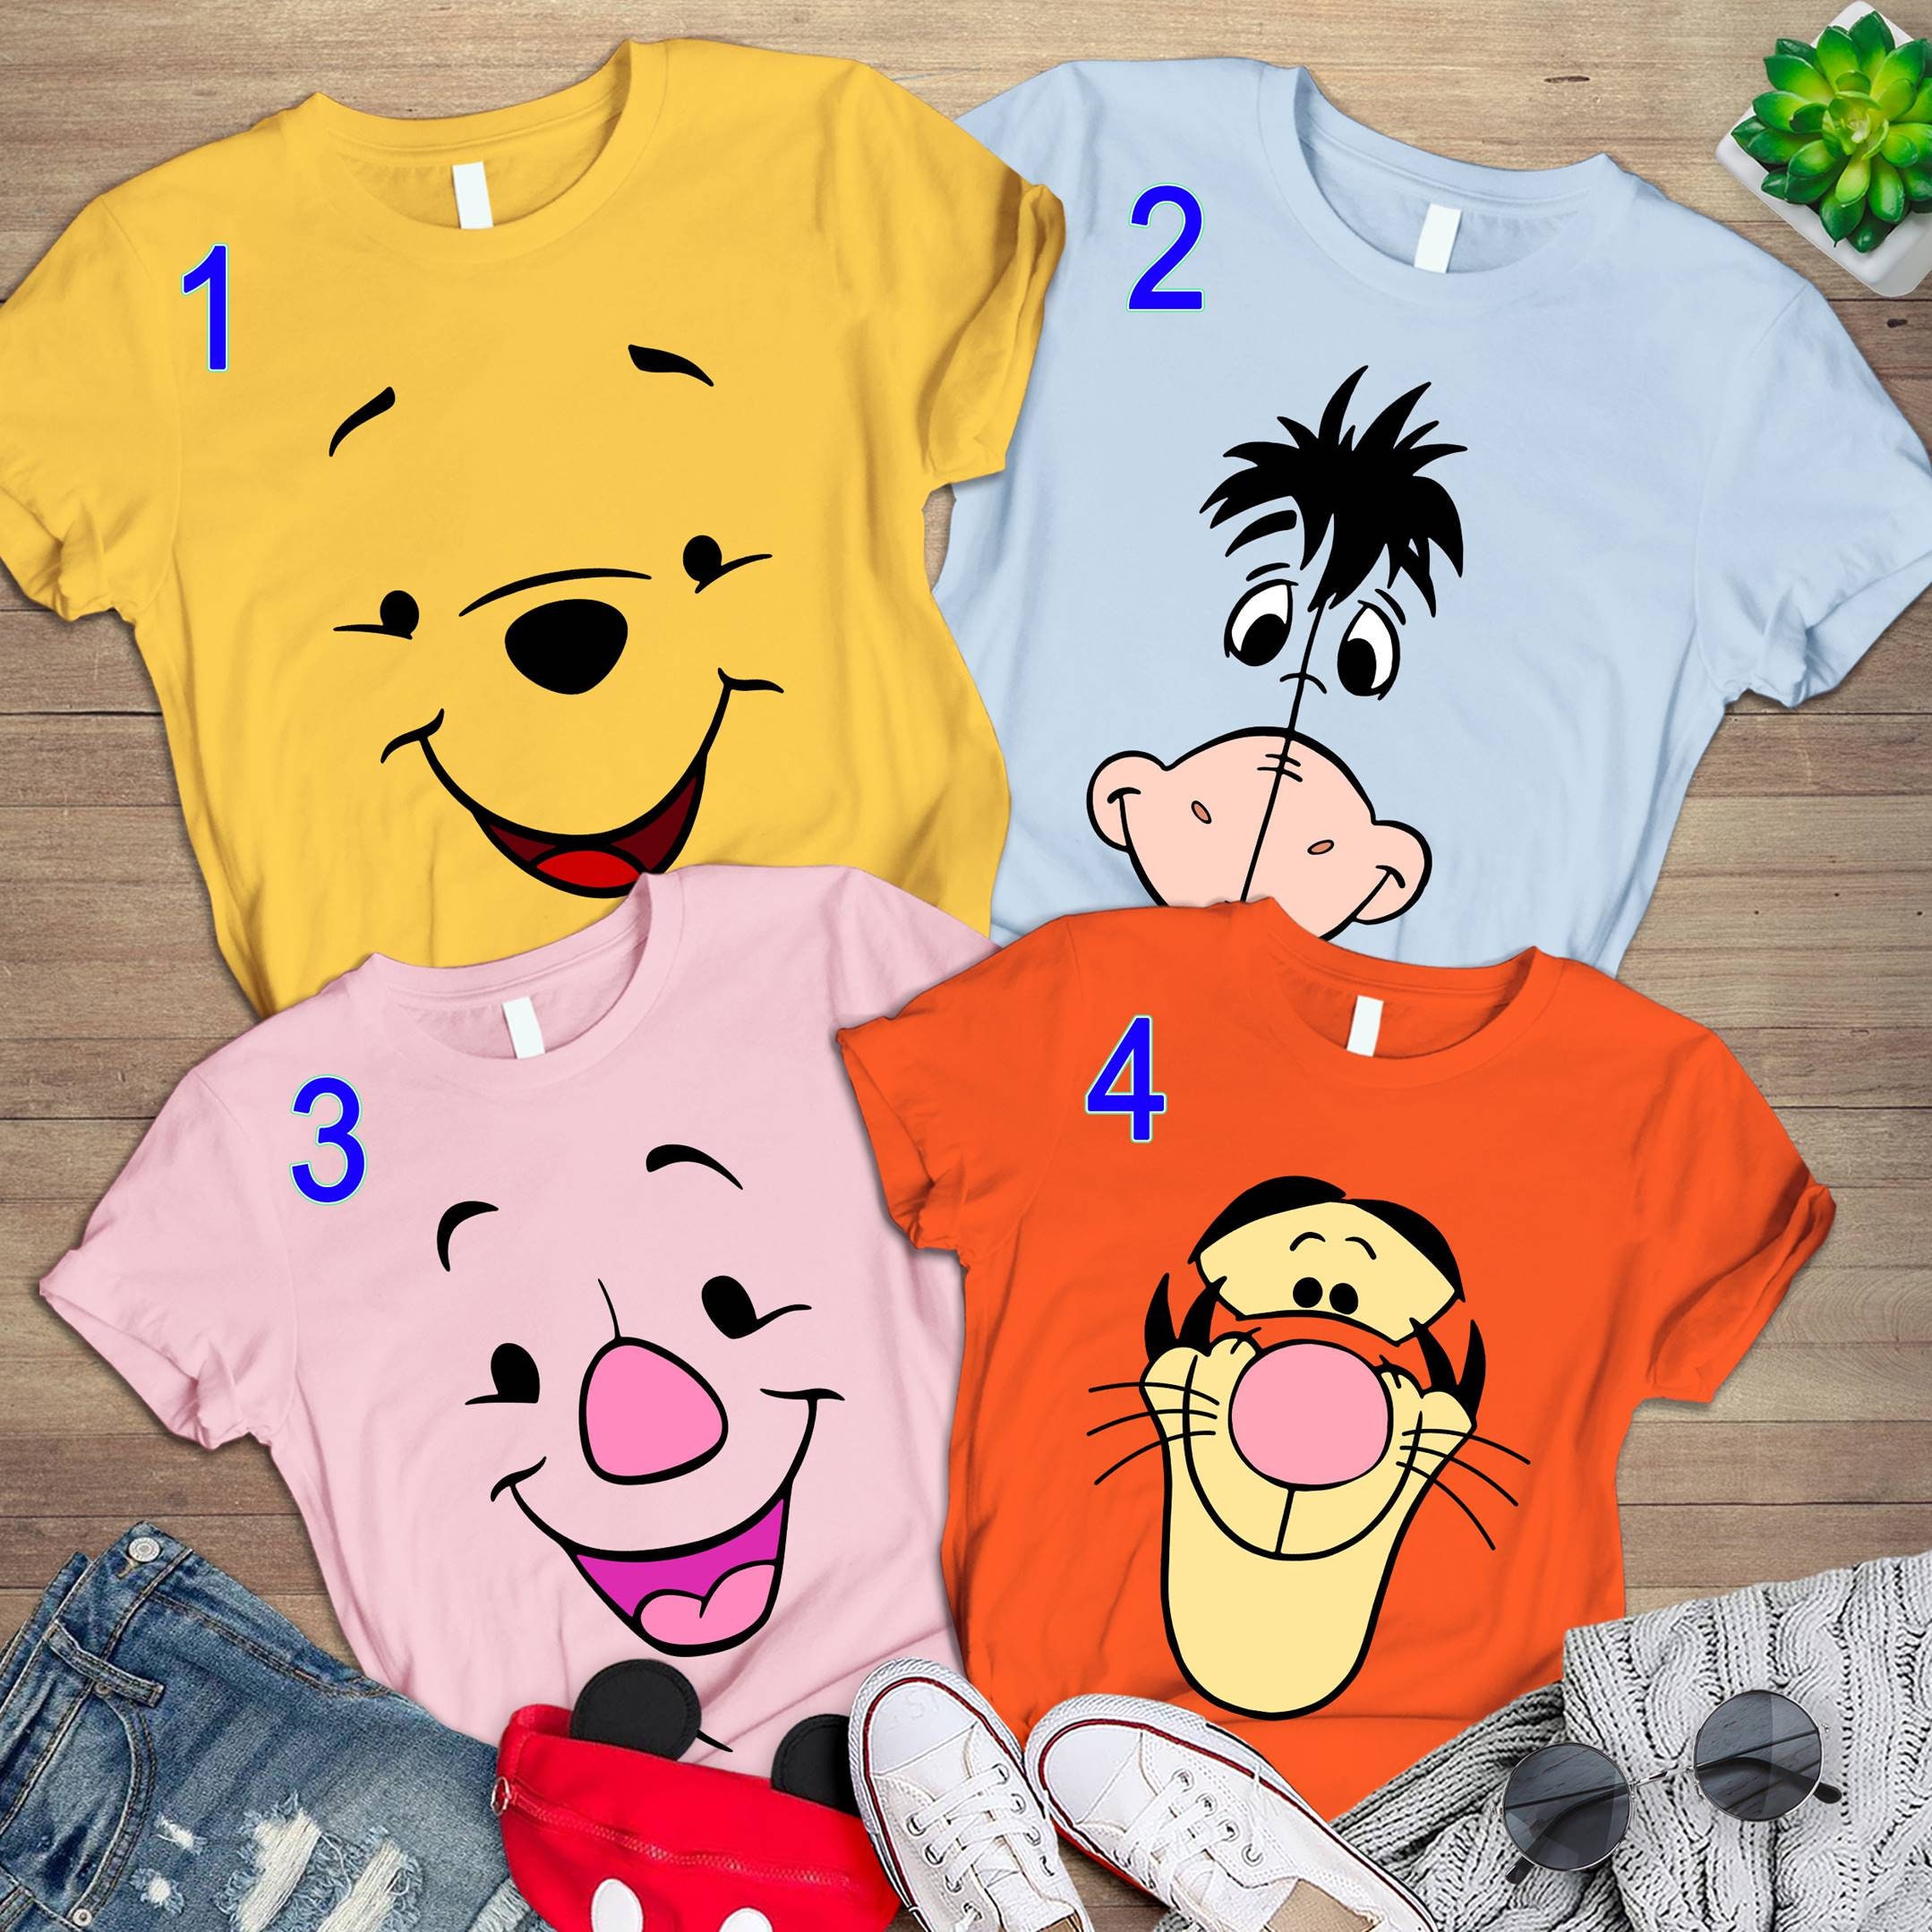 Winnie The Pooh T-Shirts For Adults 3D Discount Gift - Personalized Gifts:  Family, Sports, Occasions, Trending